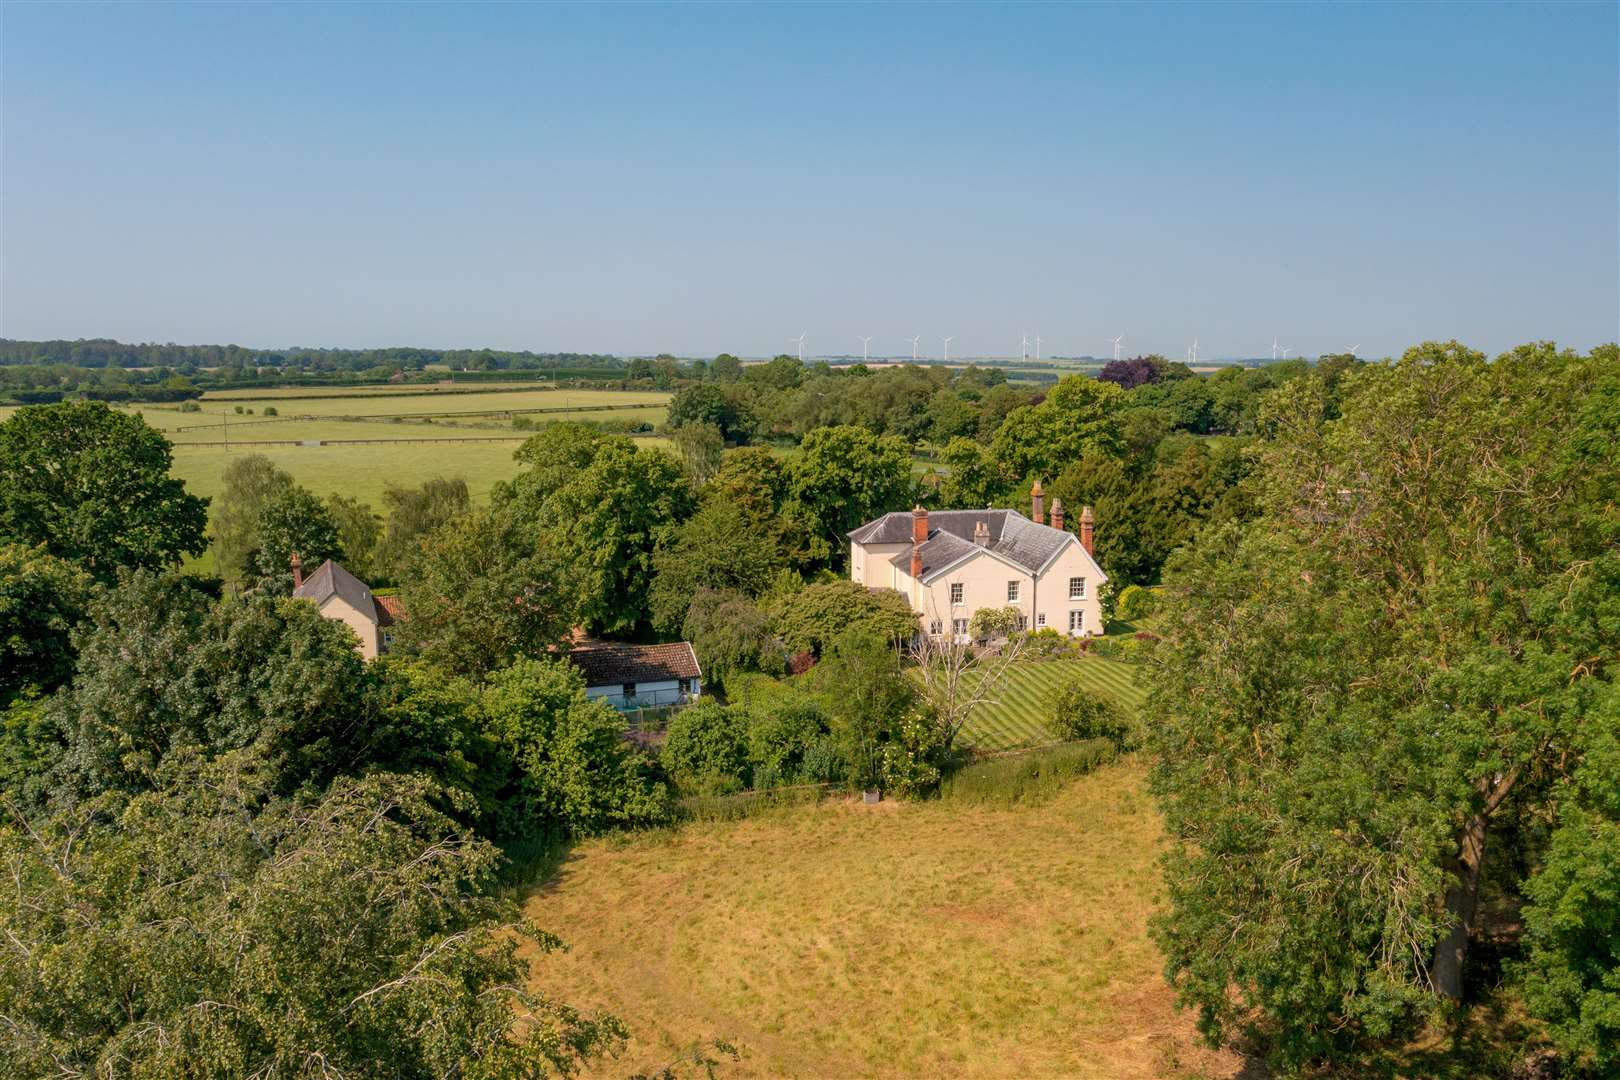 The property is now on sale with Savills with a guide price of £2,000,000